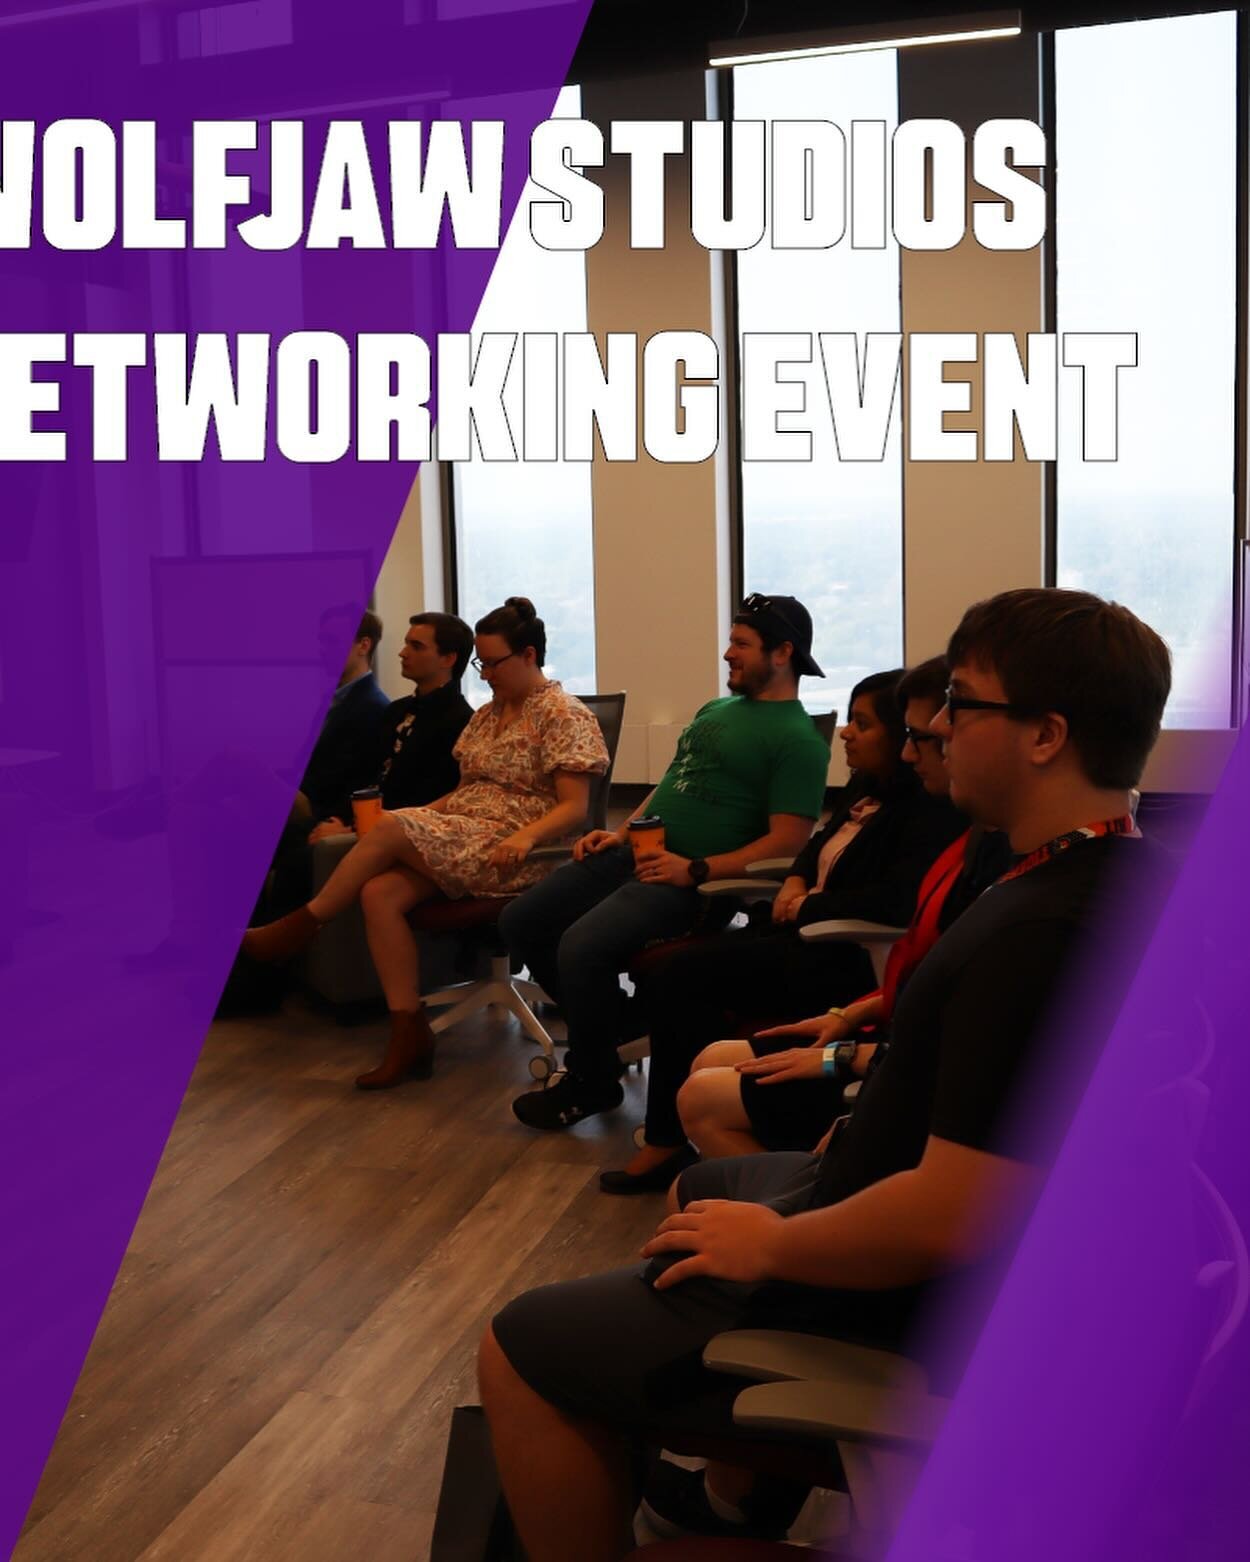 TOMORROW! Wolfjaw Studios, a game design studio out of Troy, NY, is hosting the easiest, free-est networking event of your life at the GLG Lounge 🤯 Get your start or expand your current network in the gaming industry by schmoozing with working profe